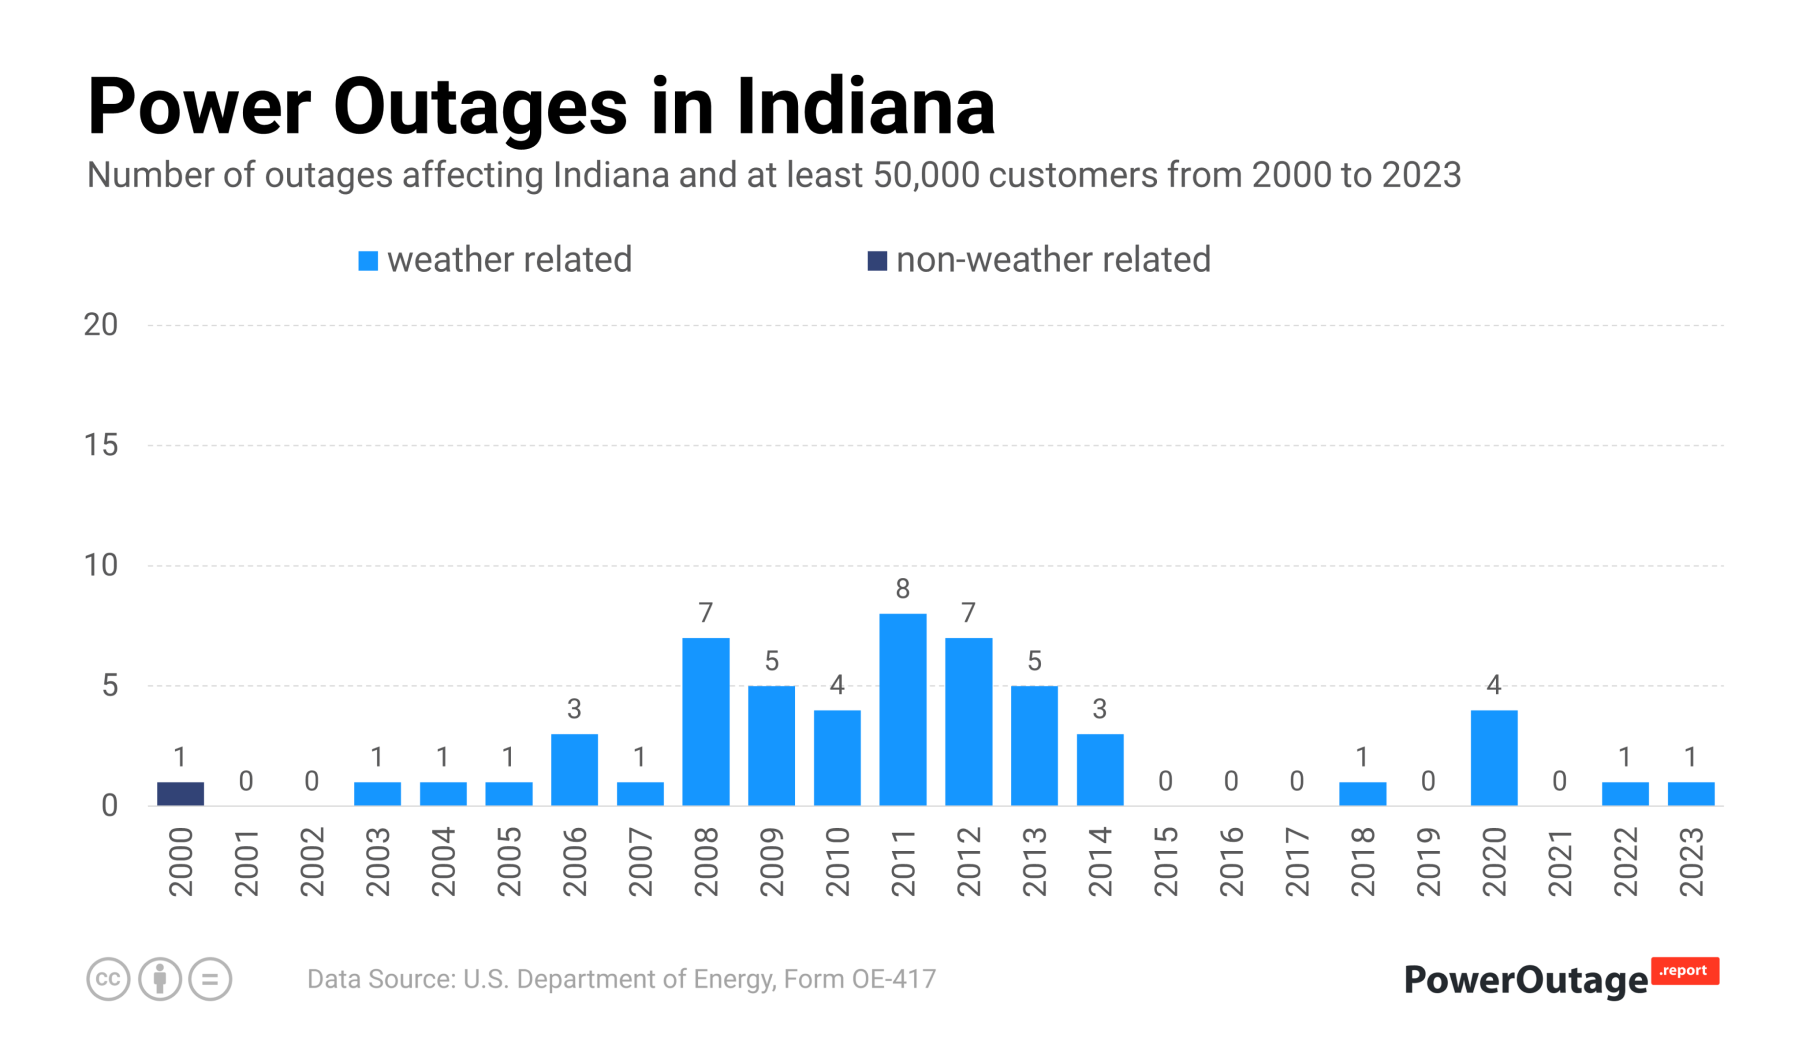 Indiana Power Outage Statistics (2000 - 2022)